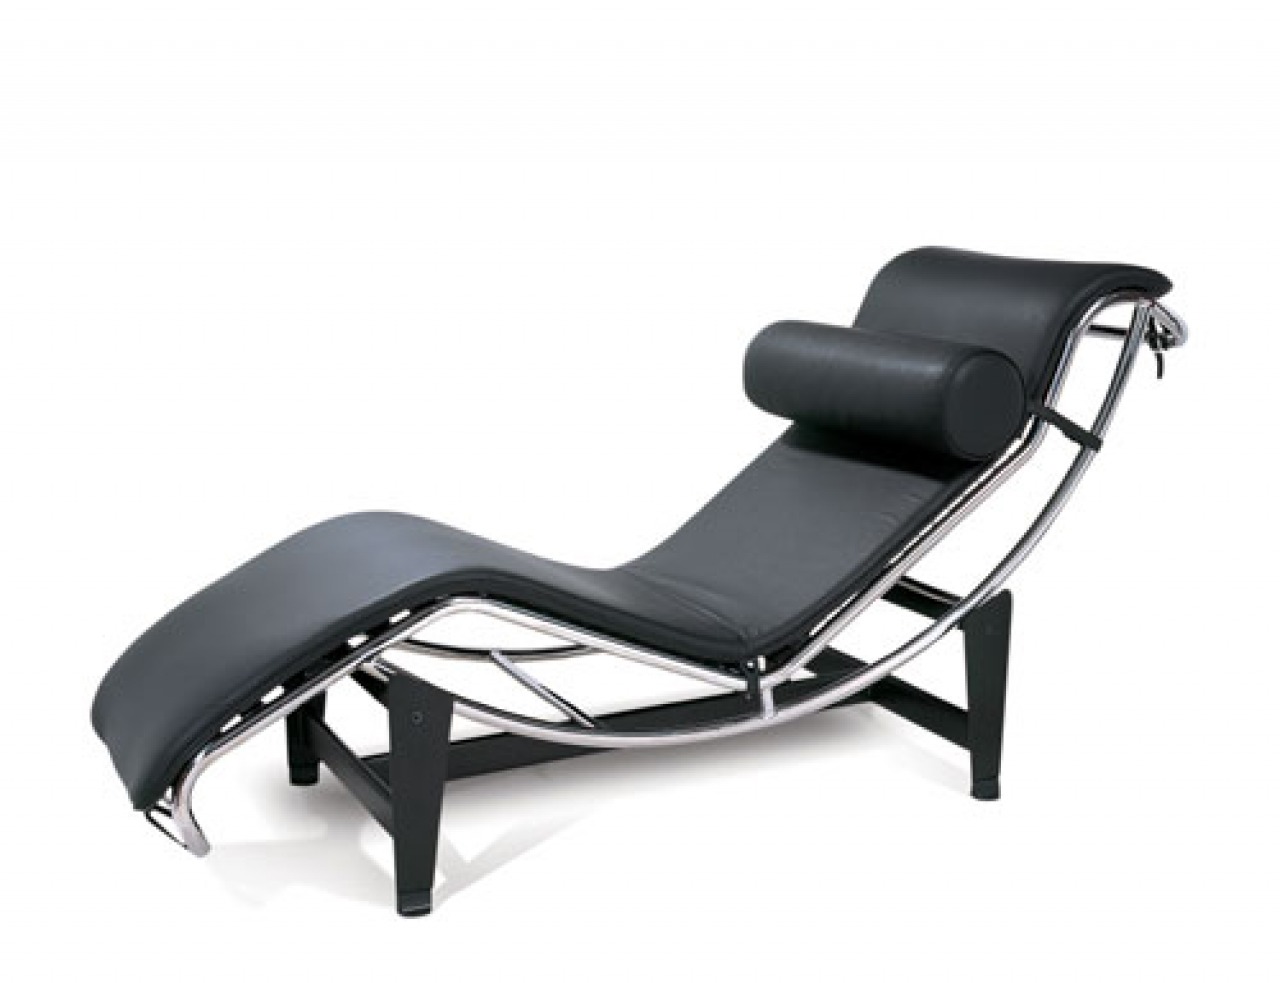 LC4 Chaise Longue at its Modern Best: Comfortable Classic that is